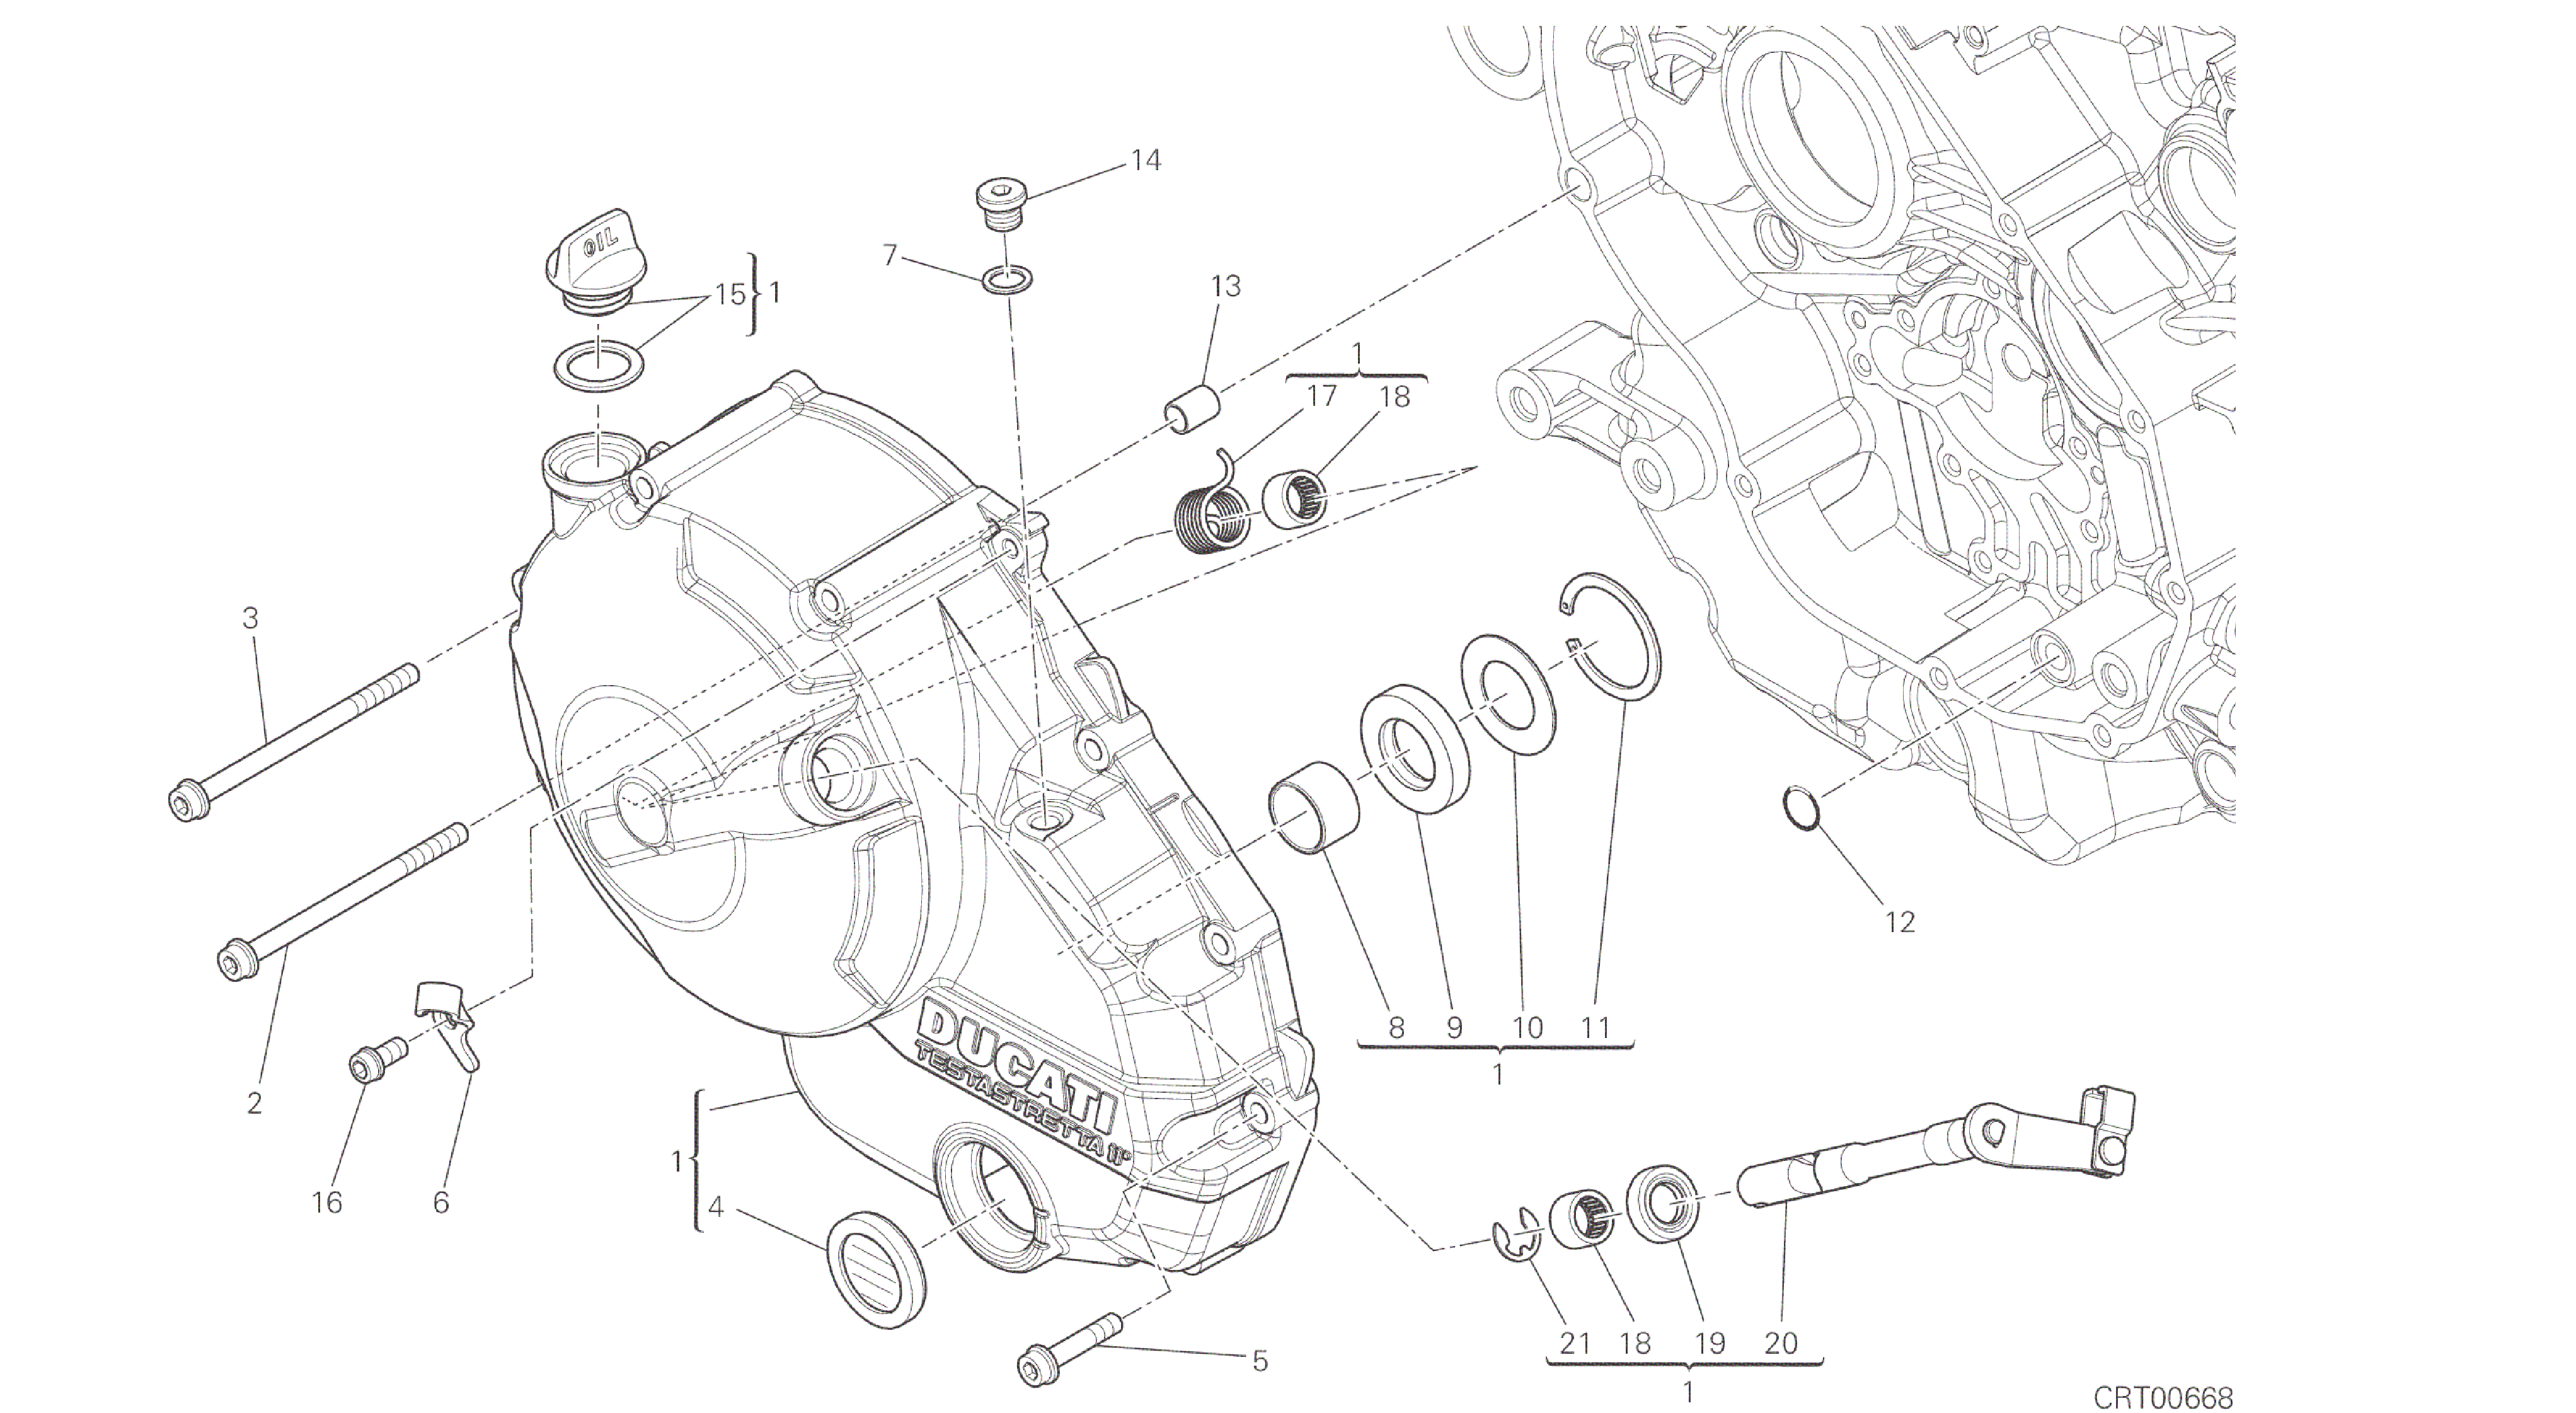 DRAWING 005 - CLUTCH COVER [MOD:M 821]GROUP ENGINE